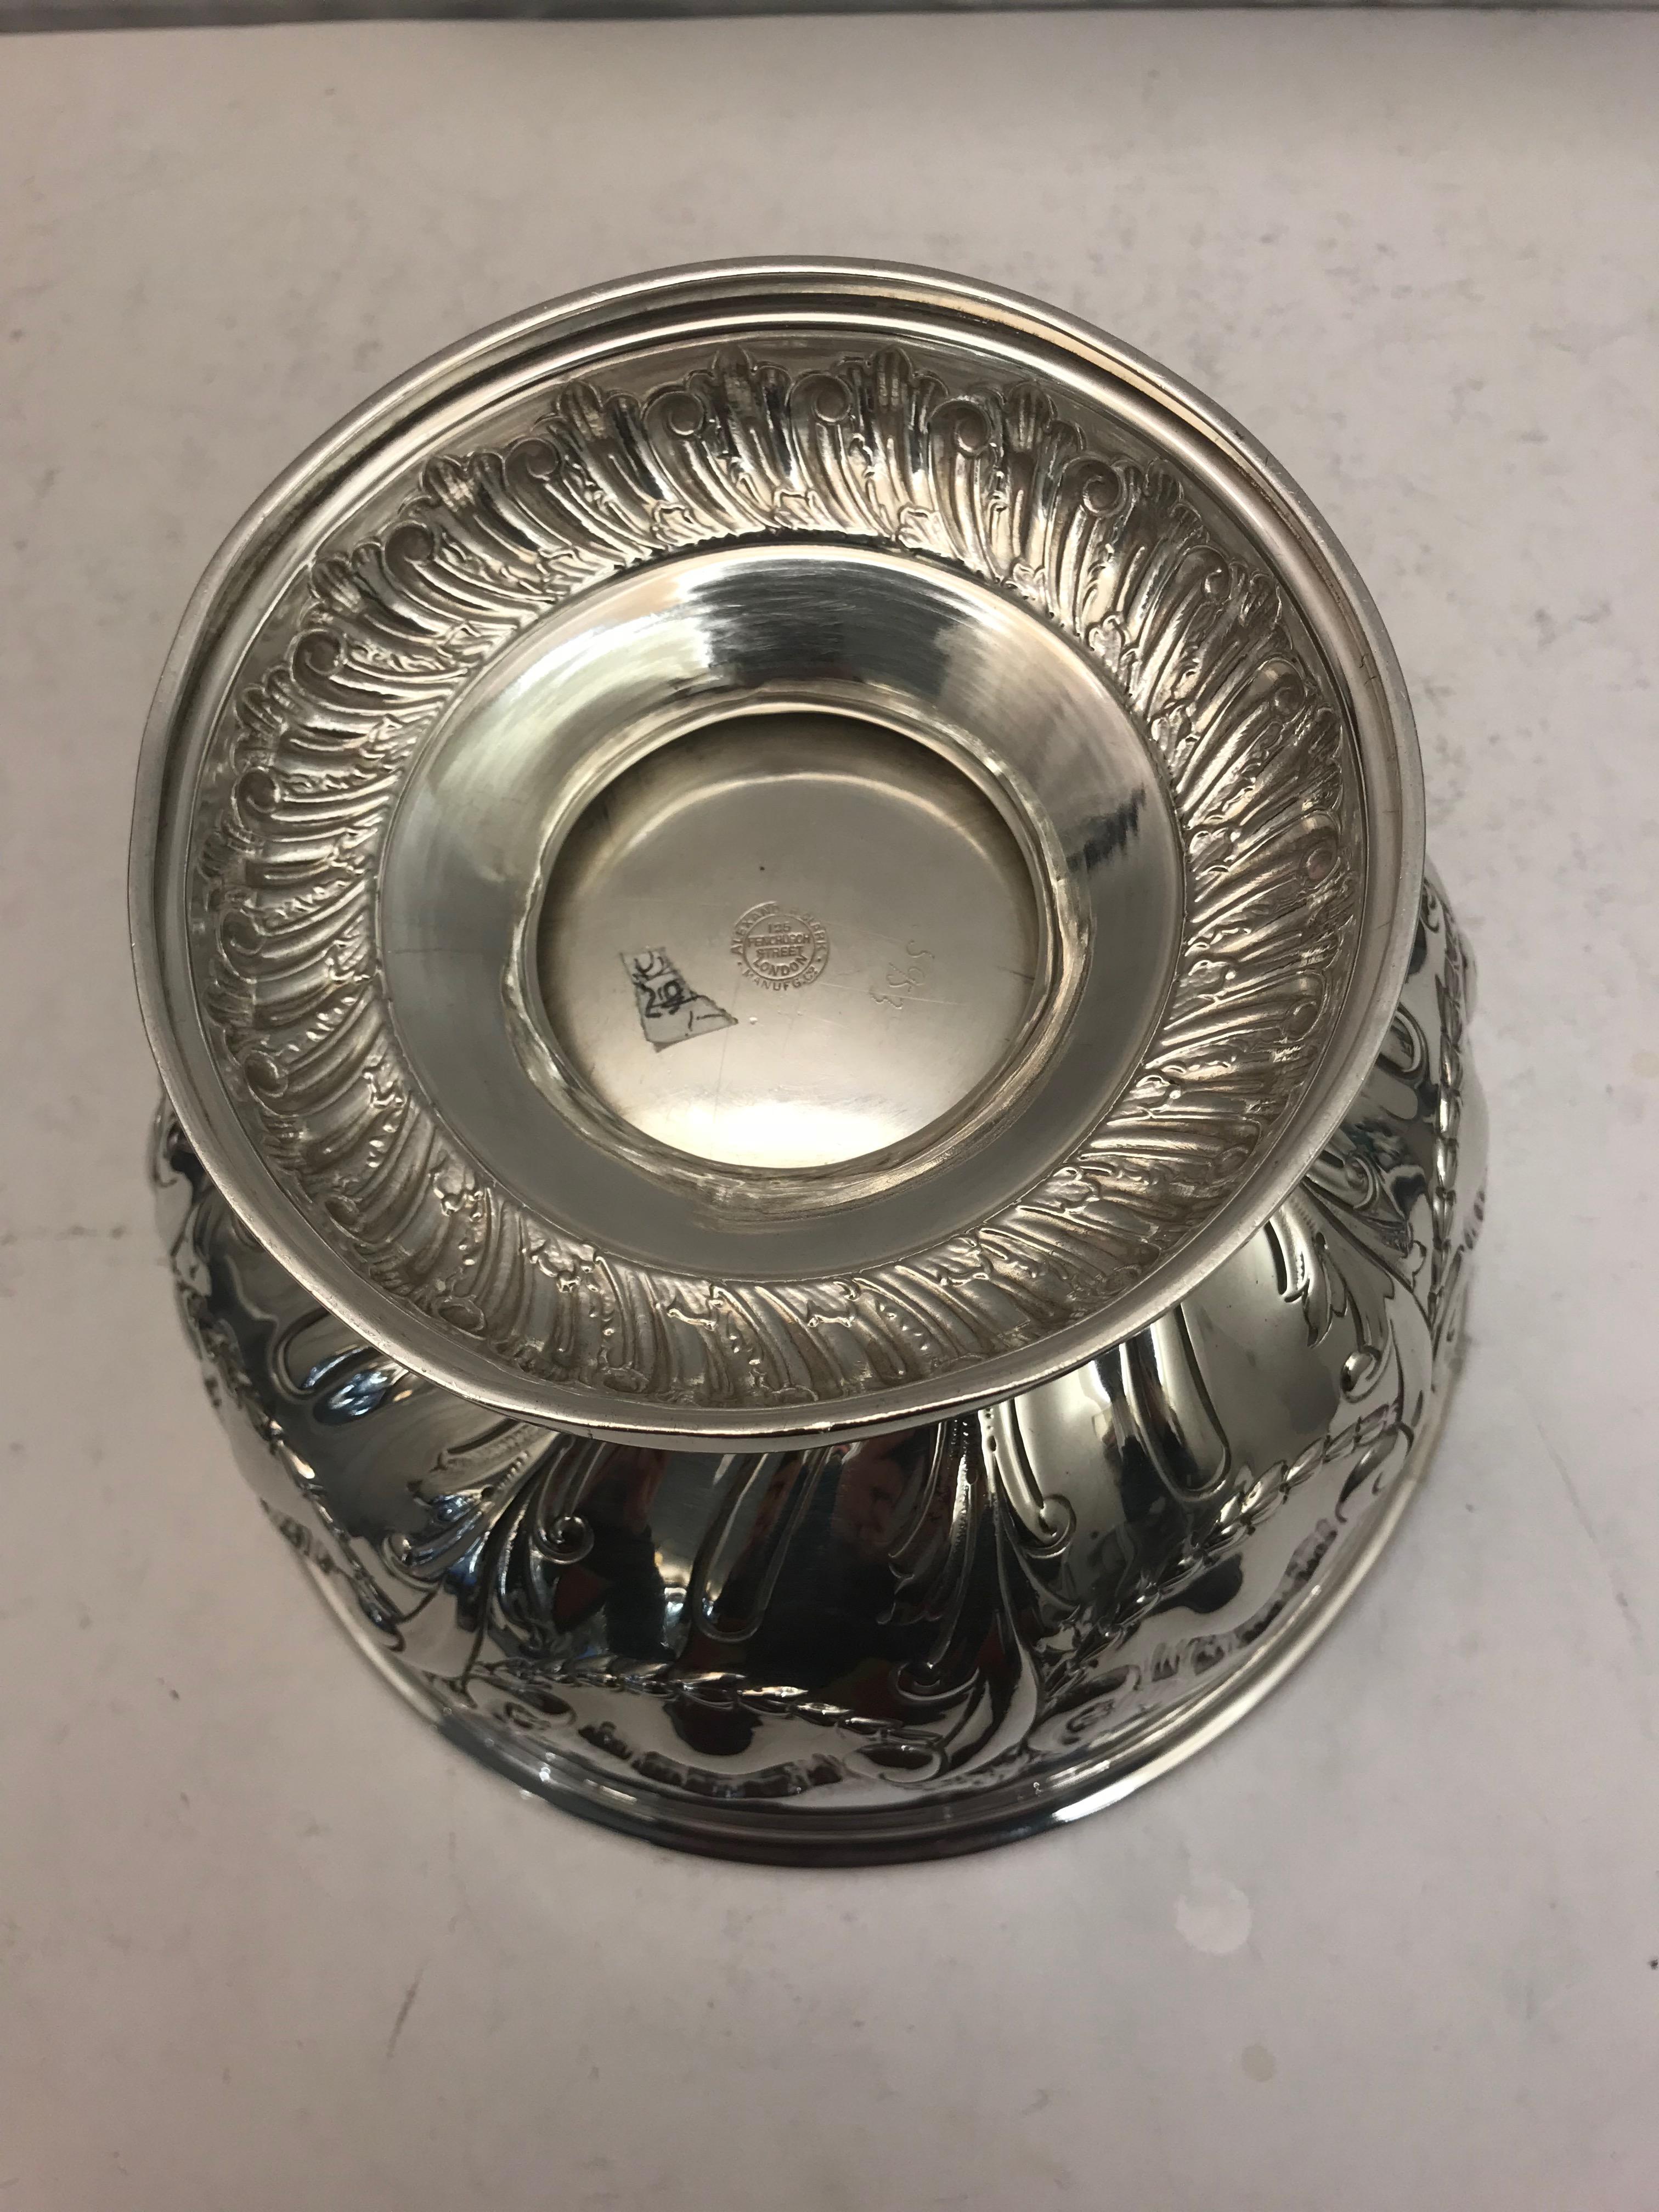 A decorative antique sterling silver bowl made in Birmingham in 1907.
 